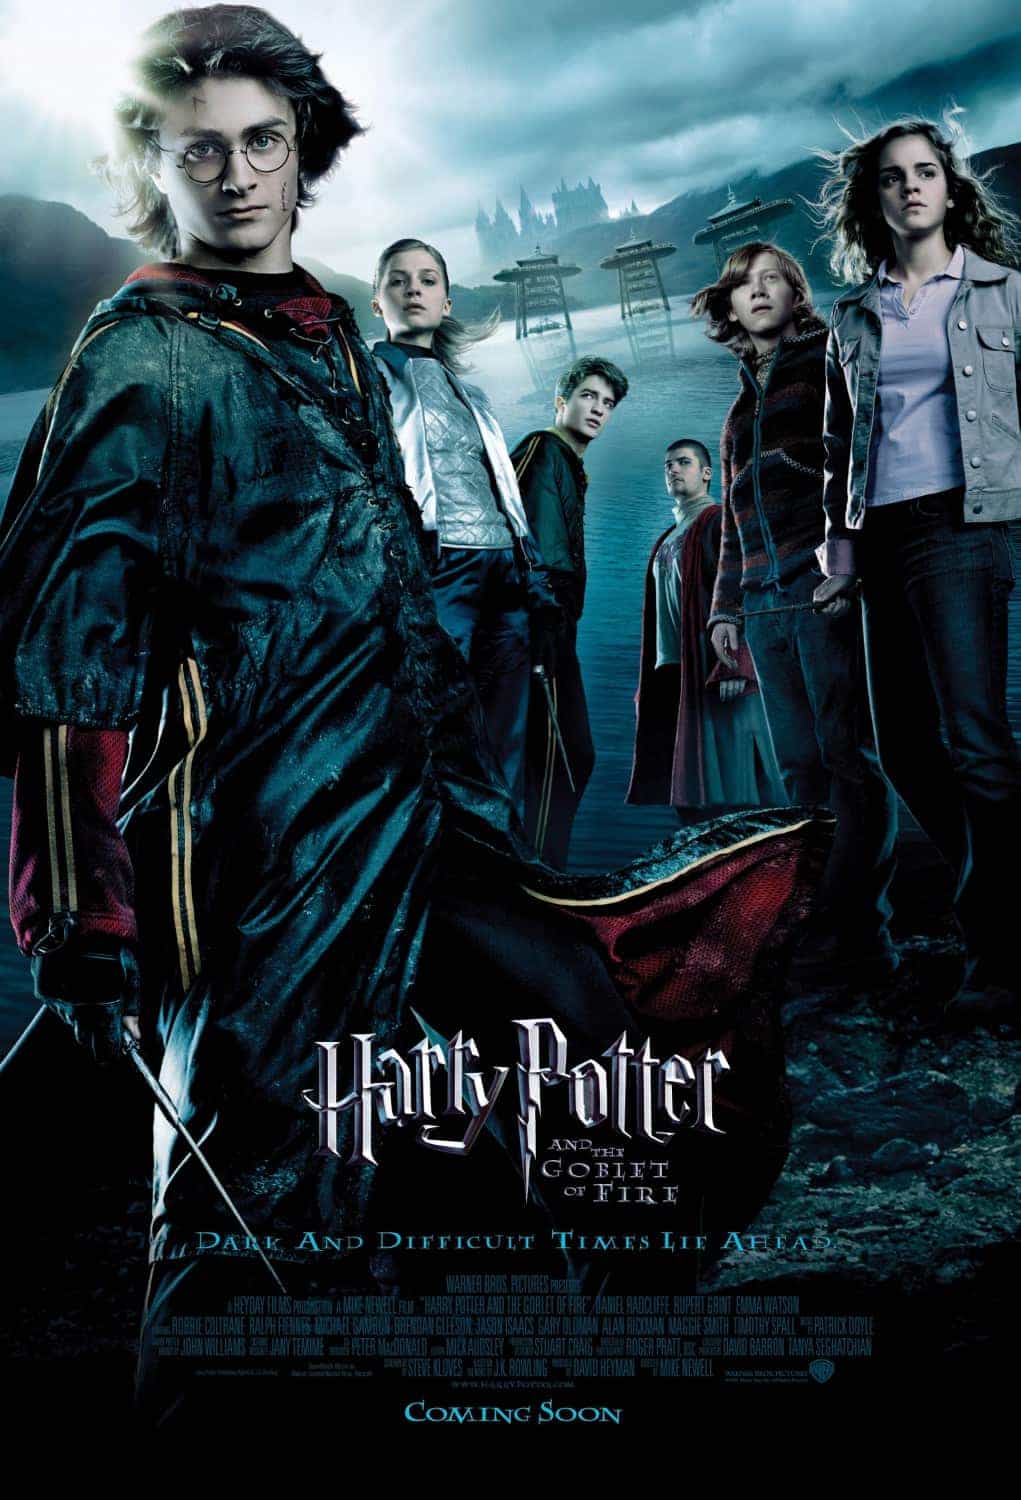 Historical UK Box Office Early Mid November - Harry Potter made its debut at the top